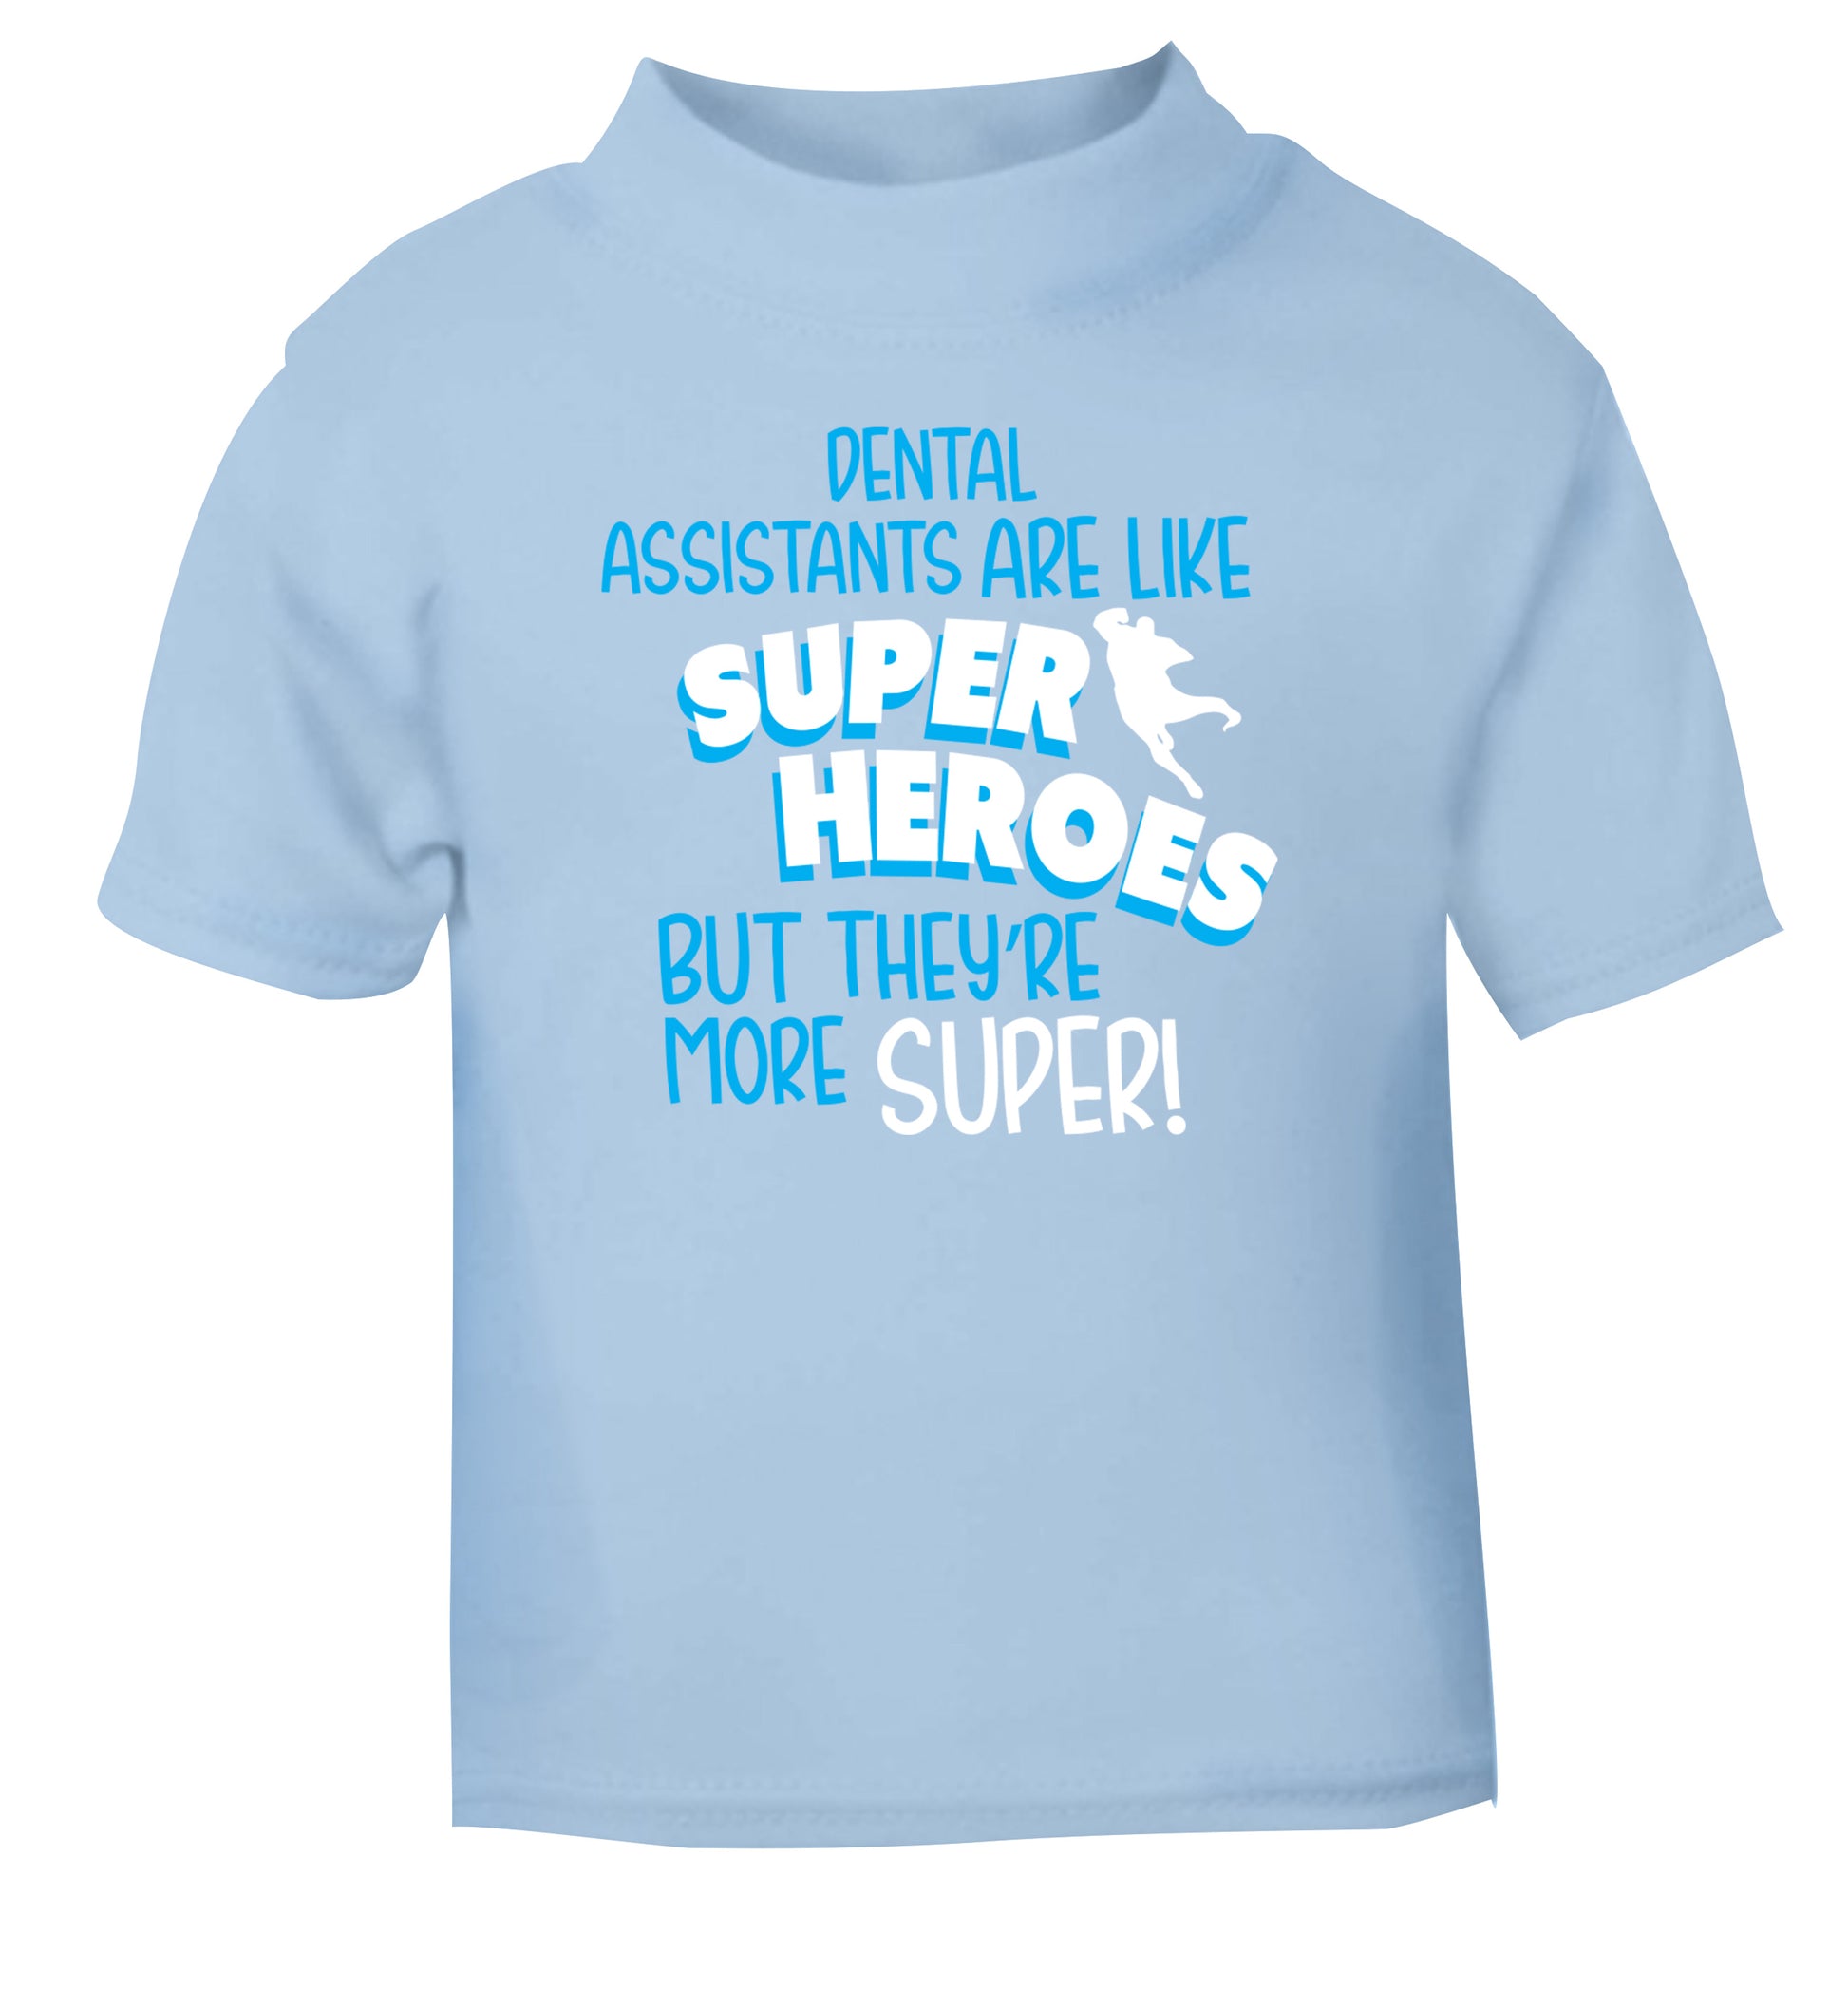 Dental Assistants are like superheros but they're more super light blue Baby Toddler Tshirt 2 Years